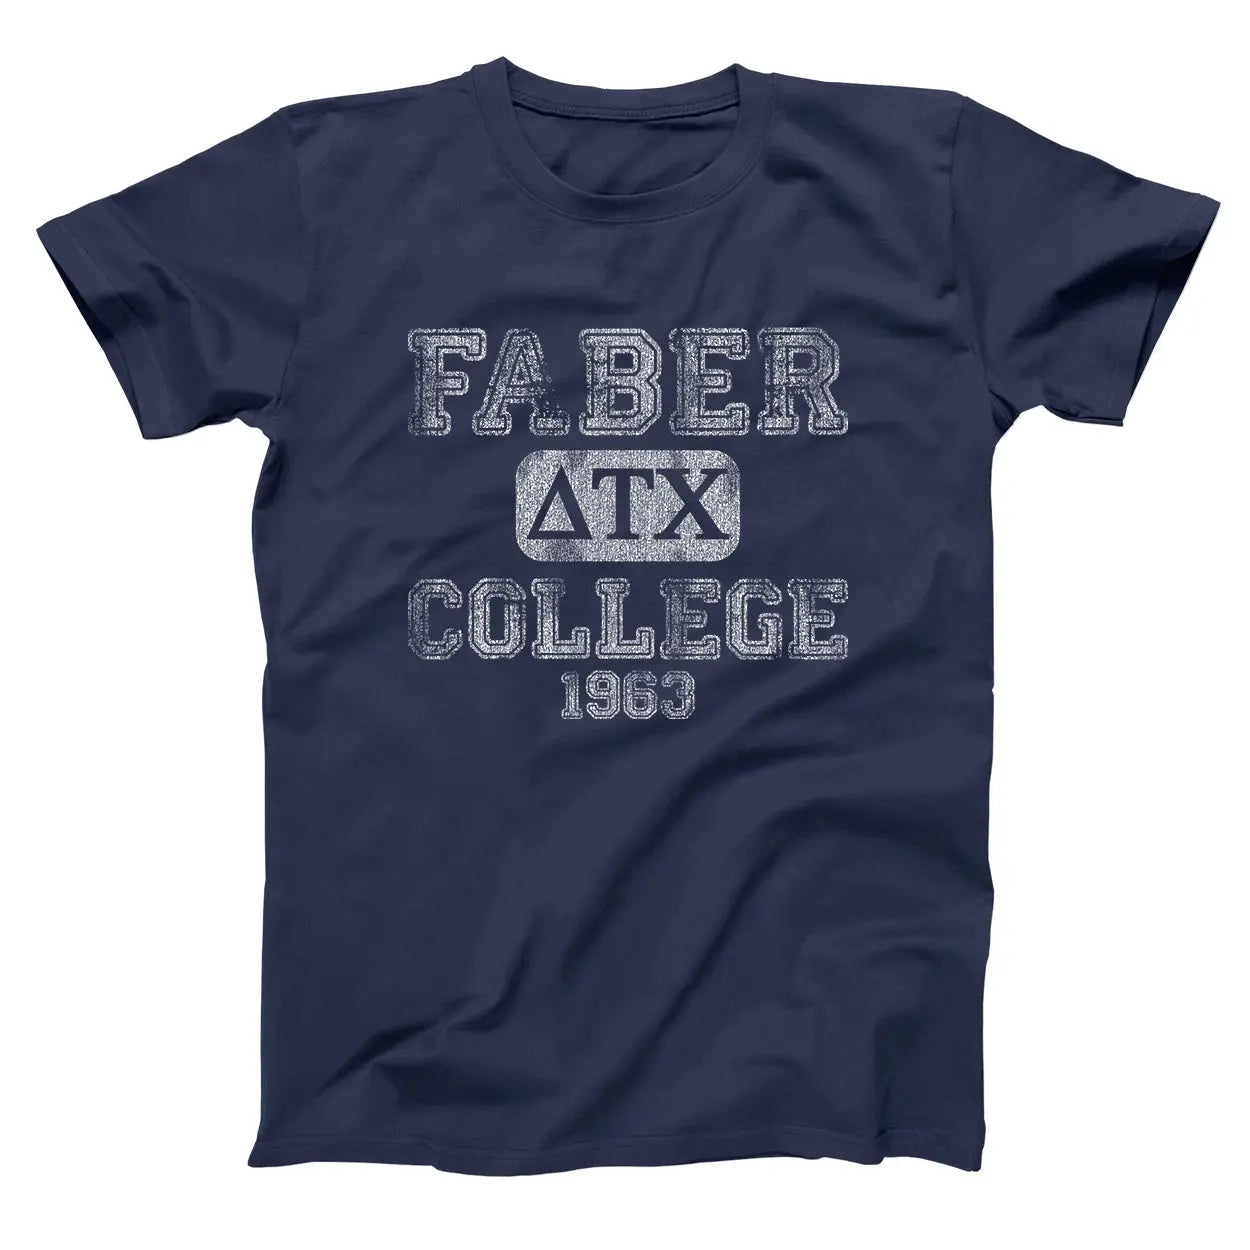 Faber College Tshirt - Donkey Tees